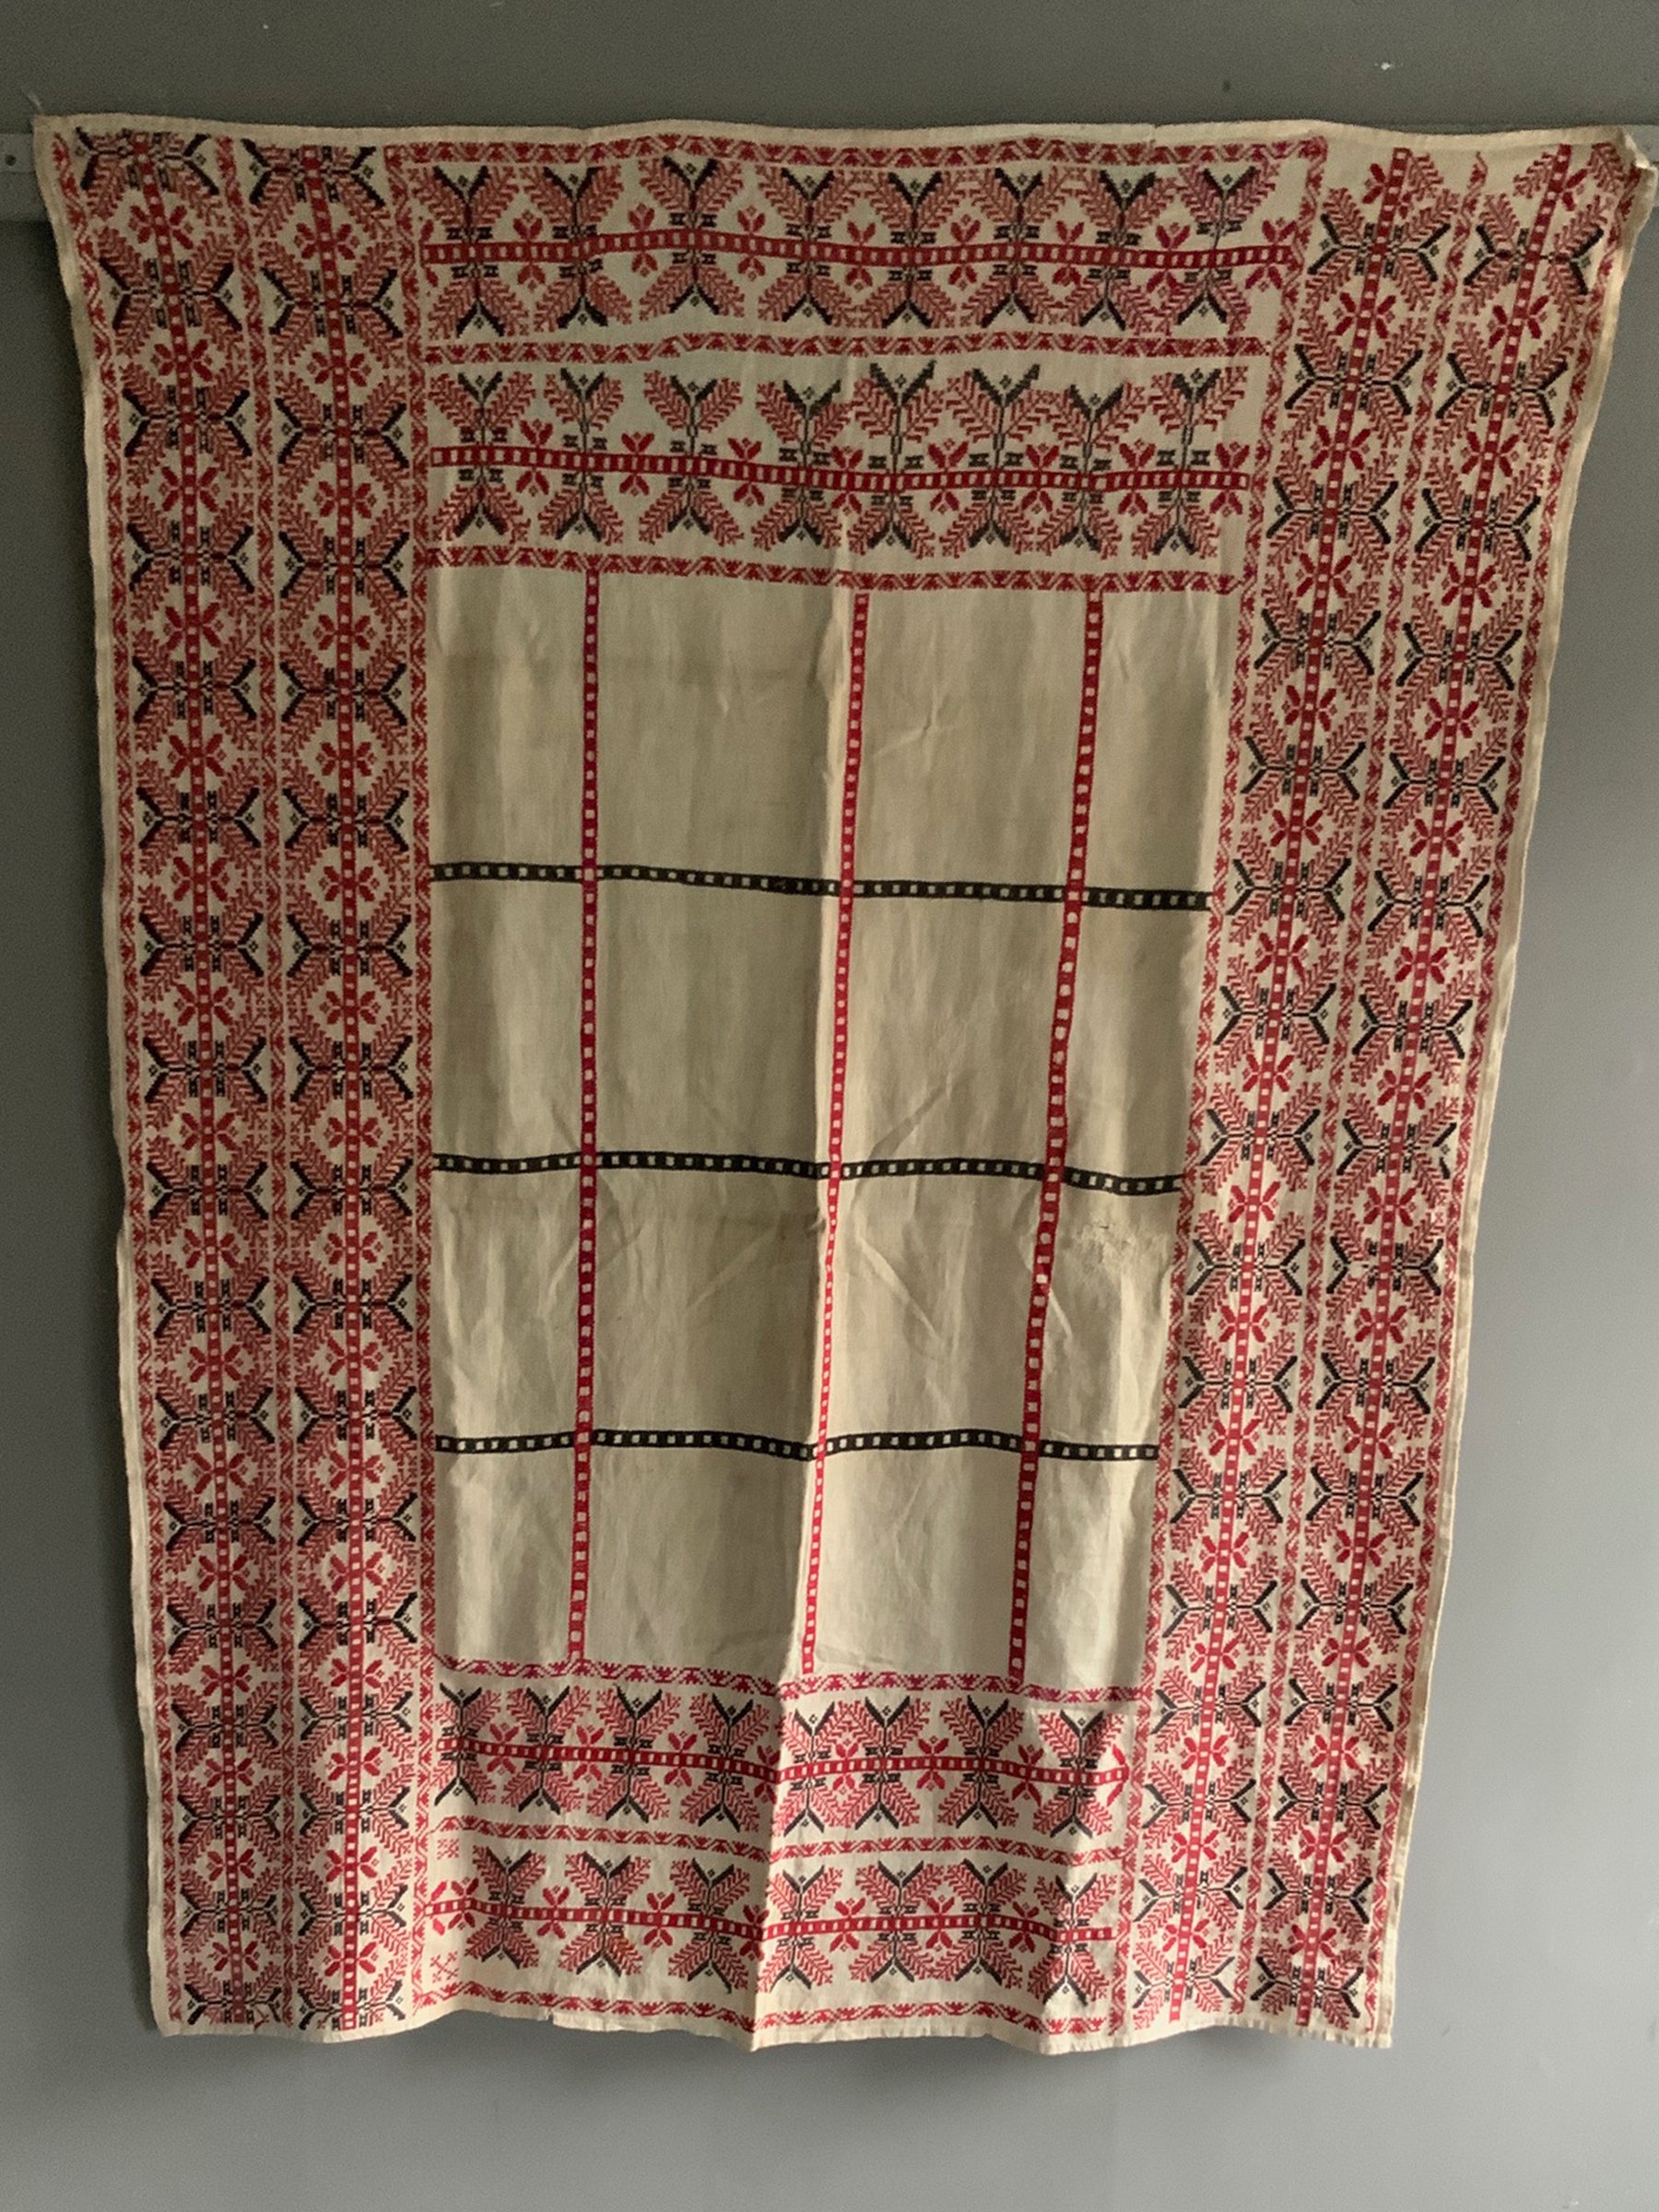 Balkan cotton embroidered cover (155 x 125cm)